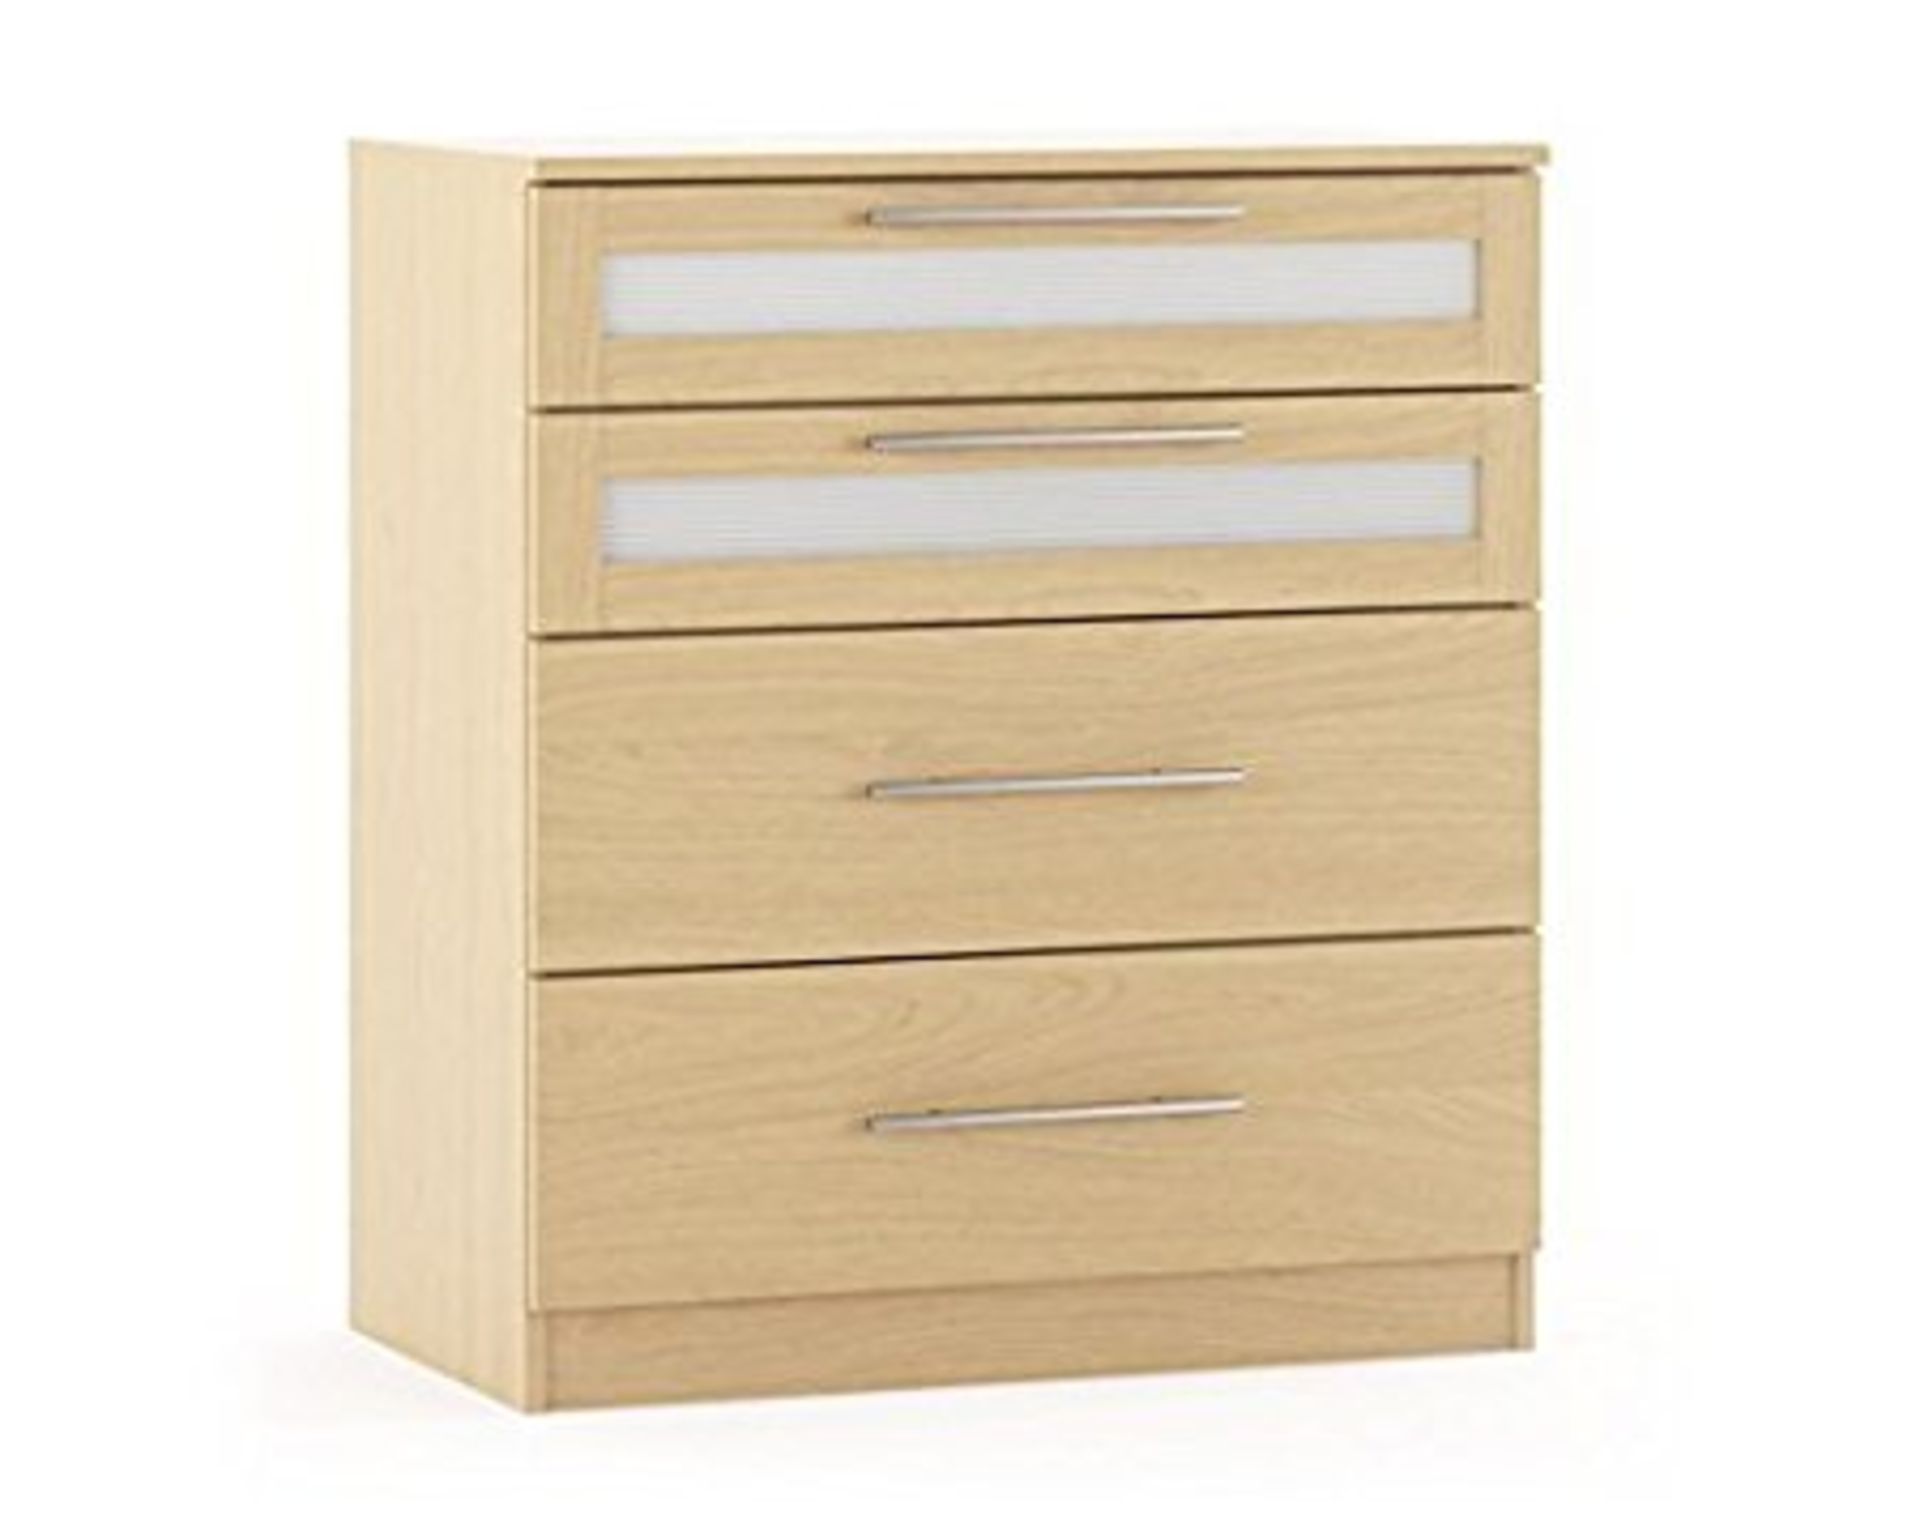 1 BRAND NEW BOXED MARBELLA 4 DRAWER CHEST IN OAK 6